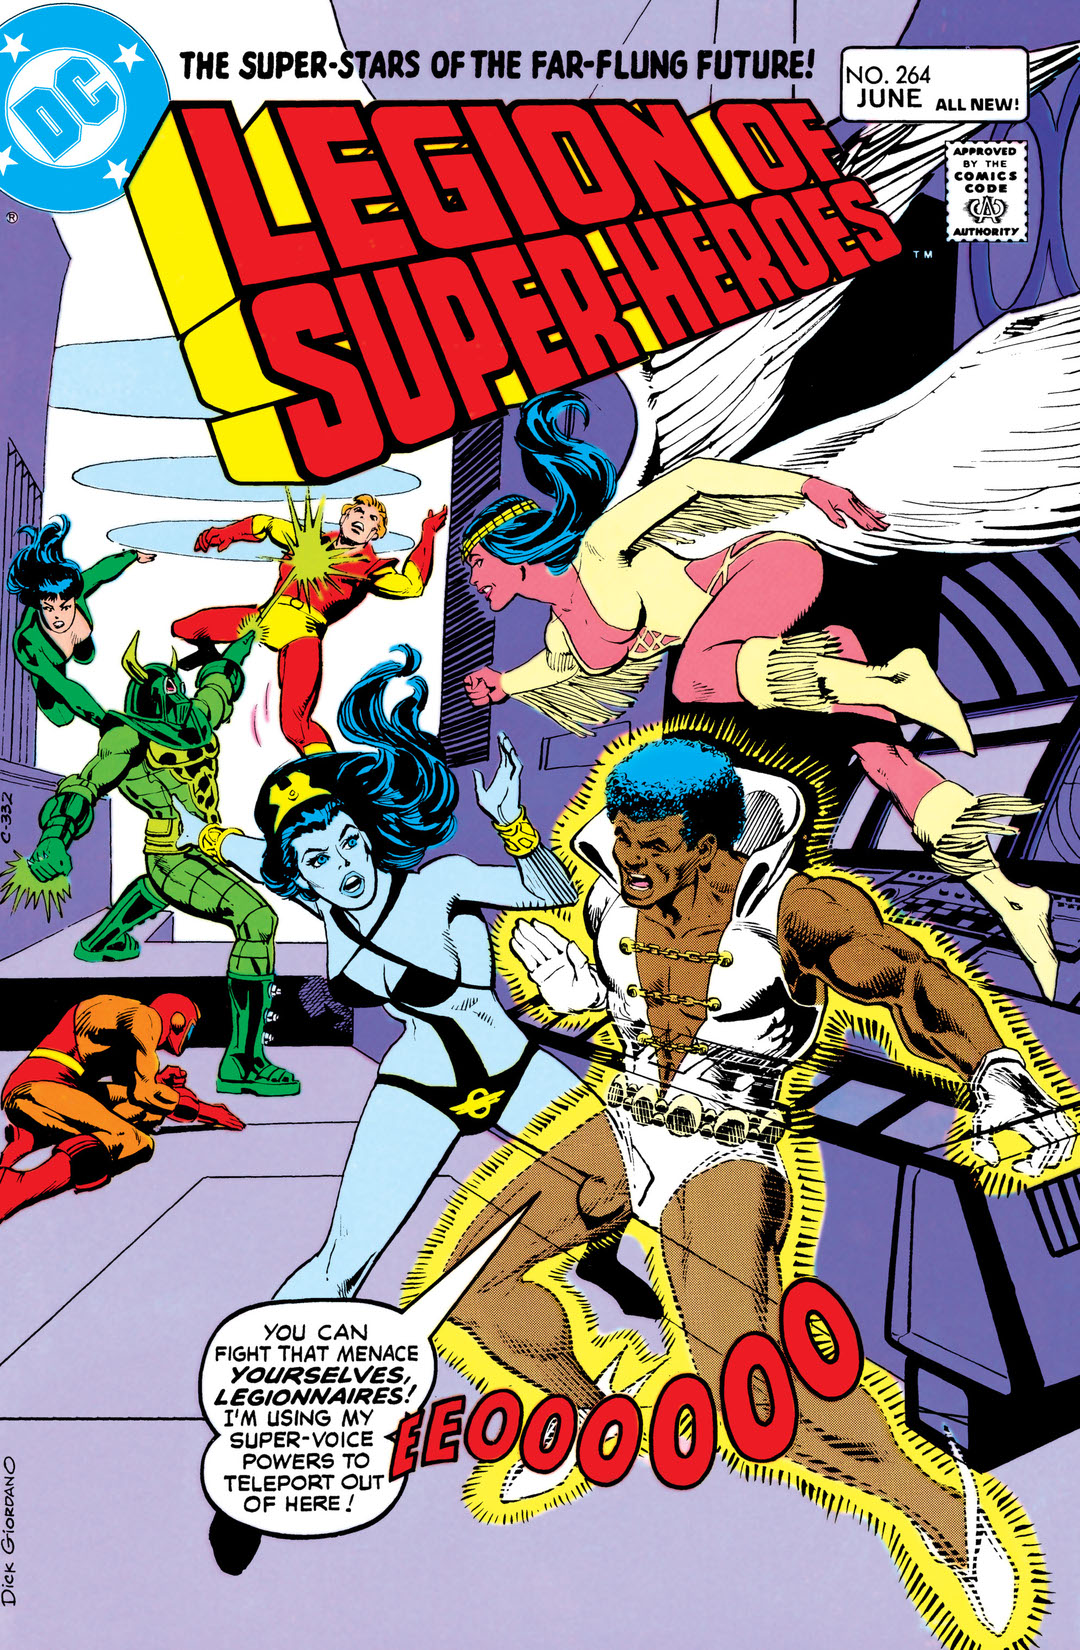 The Legion of Super-Heroes (1980-) #264 preview images